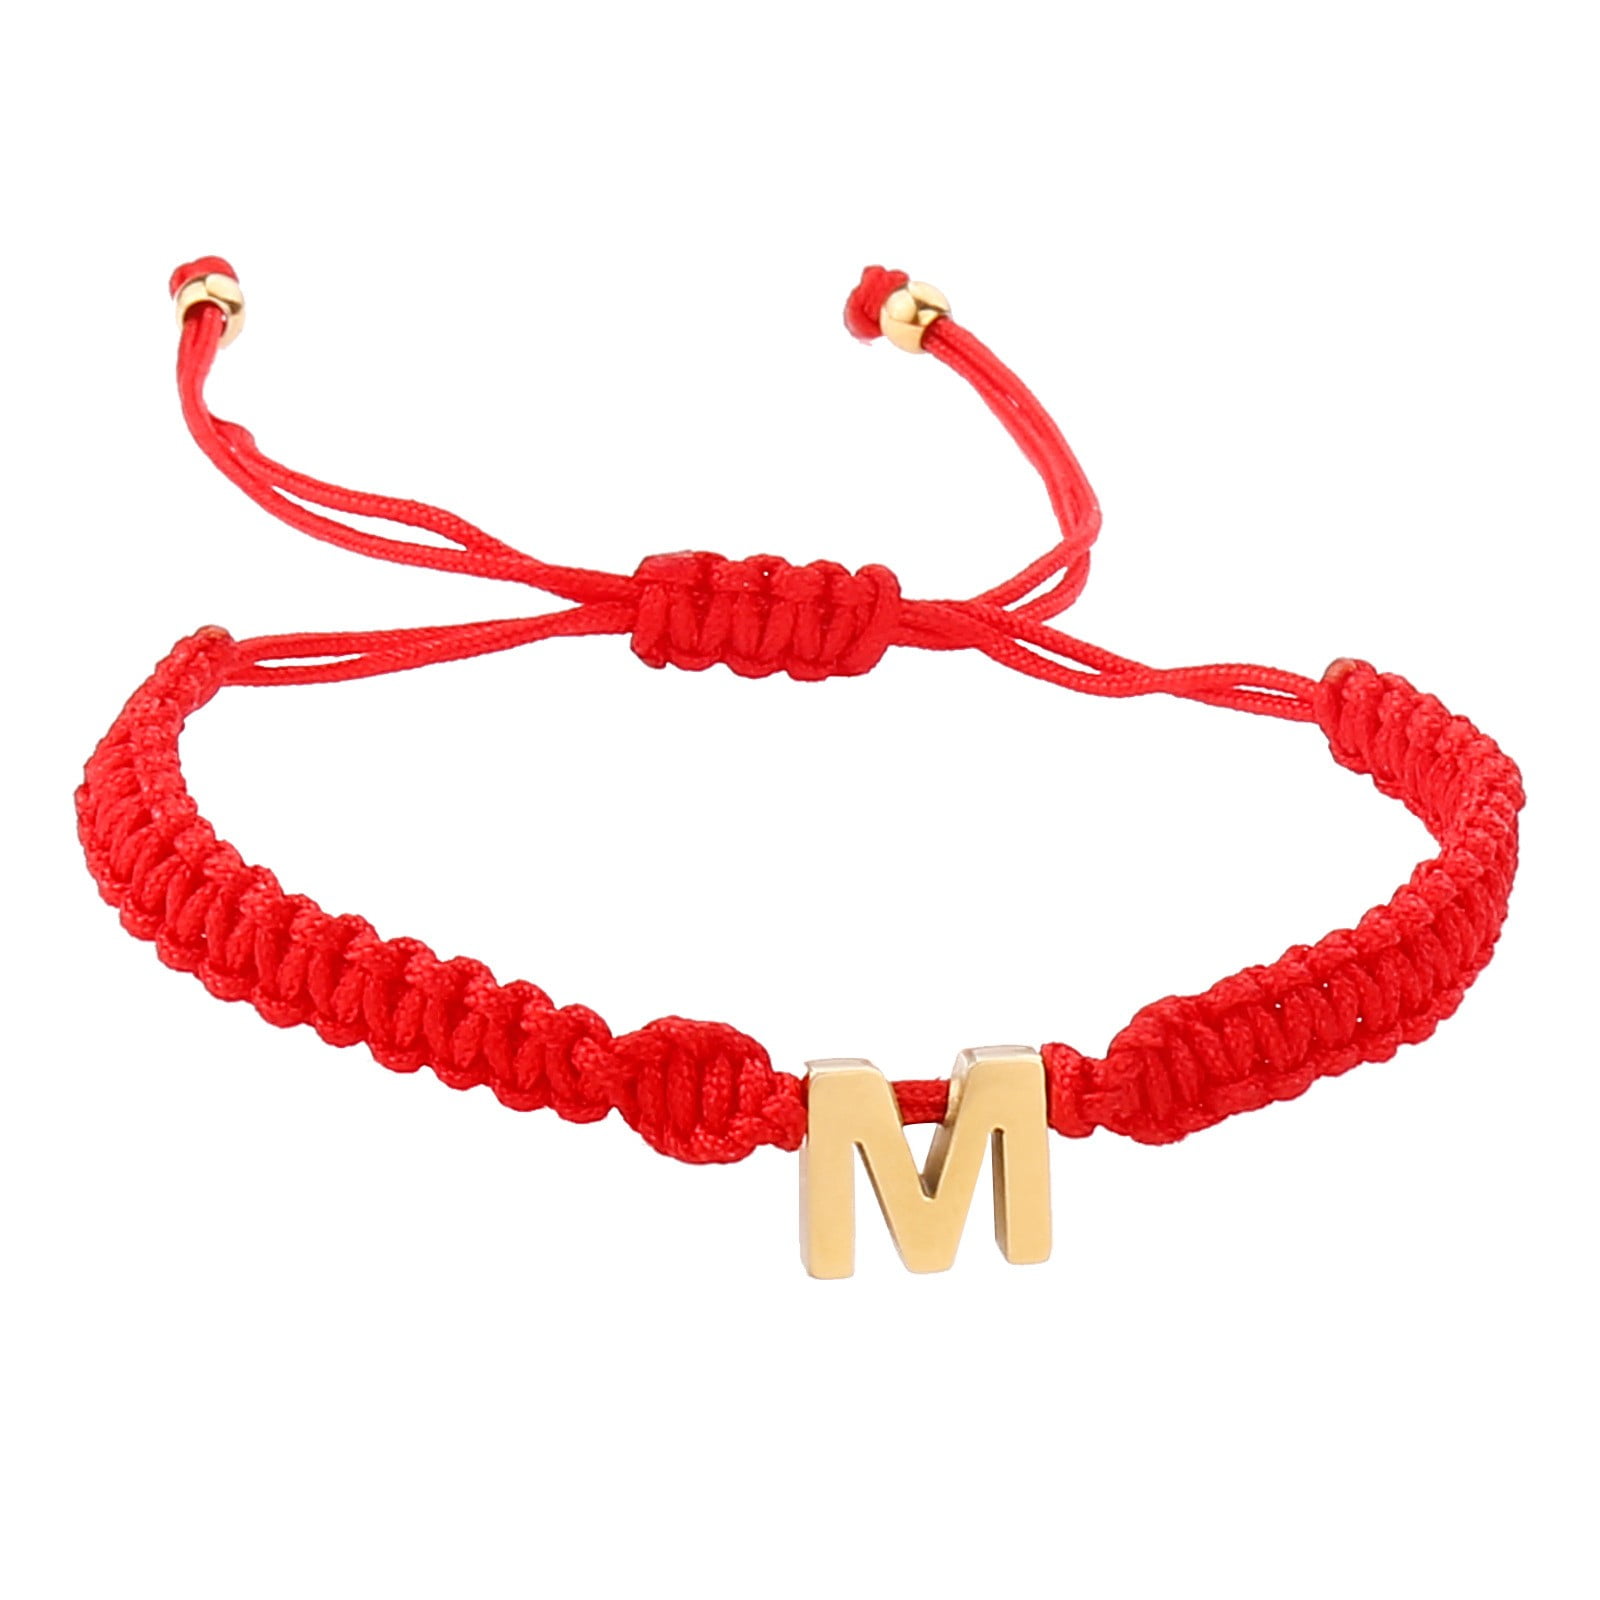 Wendunide Ornaments, Personalized 26 Initial Bracelet Stainless Steel Gold Plated Letter Red Woven Bracelet Charm Bracelet Woven Bracelet for Men